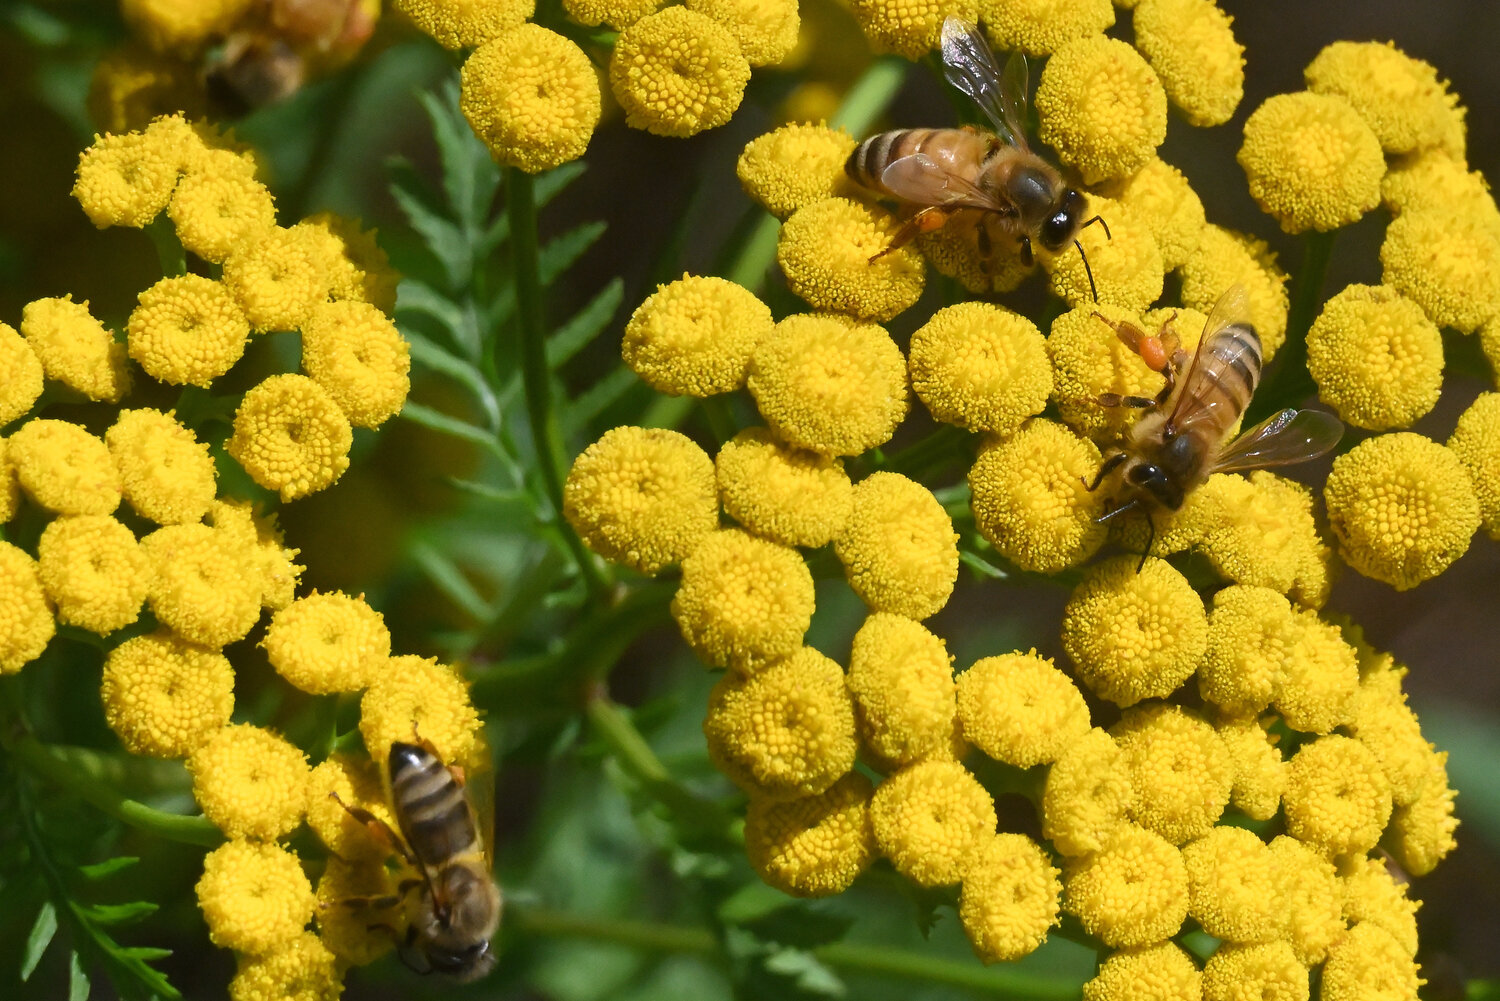 These honeybees were attracted to a small patch of yellow flowers. The plant turned out to be common tansy (Tanacetum vulgare L.). It is also considered invasive, having been brought over from Europe during the 1600s as an ornamental plant. ..One thing to say on its behalf, though, is that there were at least a dozen honeybees on flowers in this small patch of common tansy.....